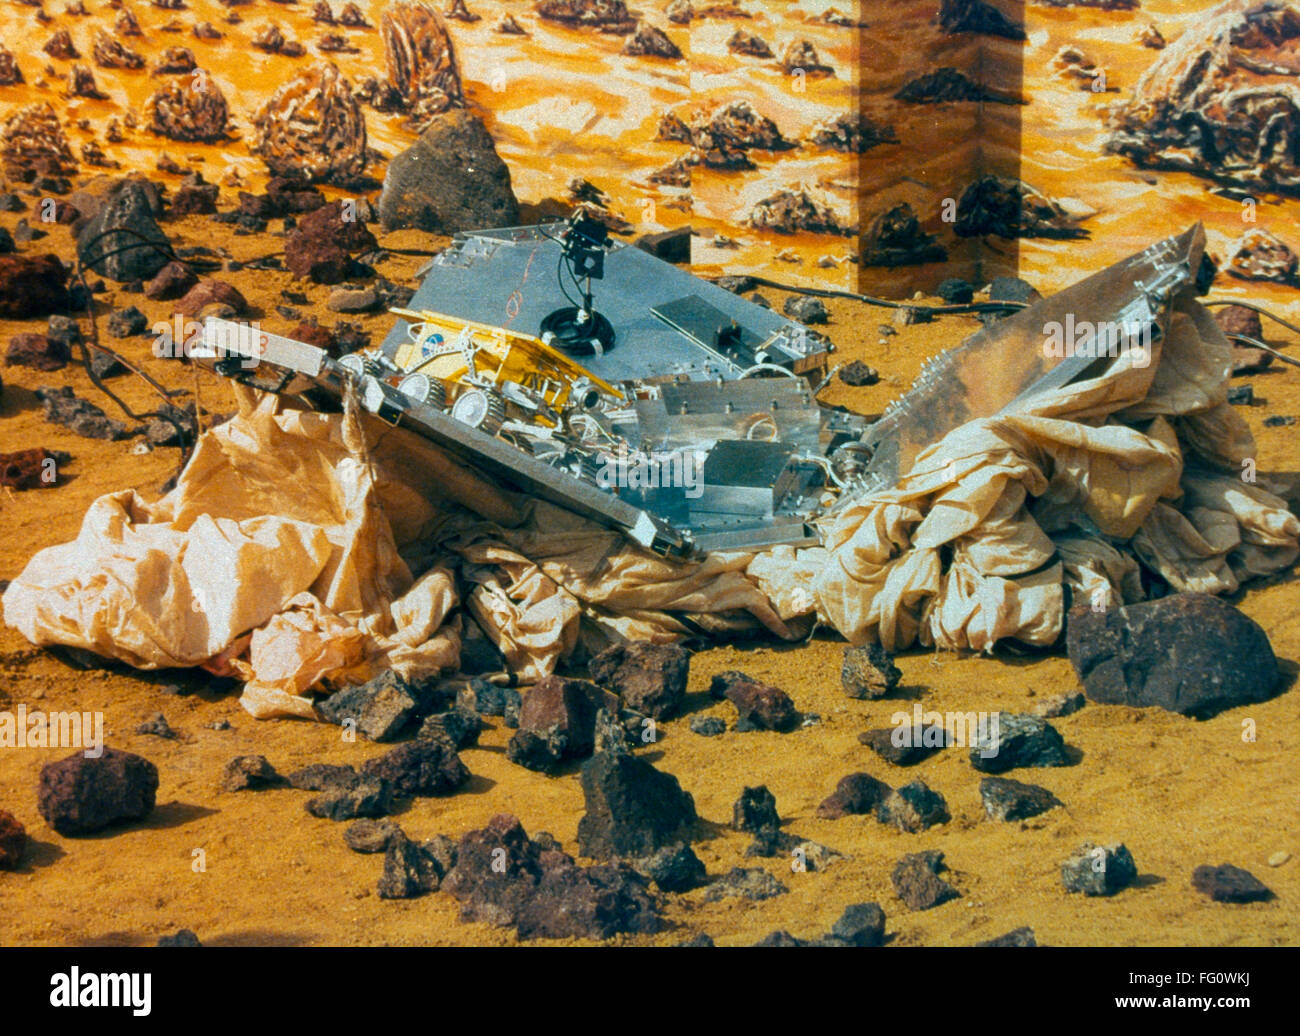 SPACE: PATHFINDER, 1995. /nThe Mars Pathfinder and Sojourner during testing. Photograph, 1995. Stock Photo